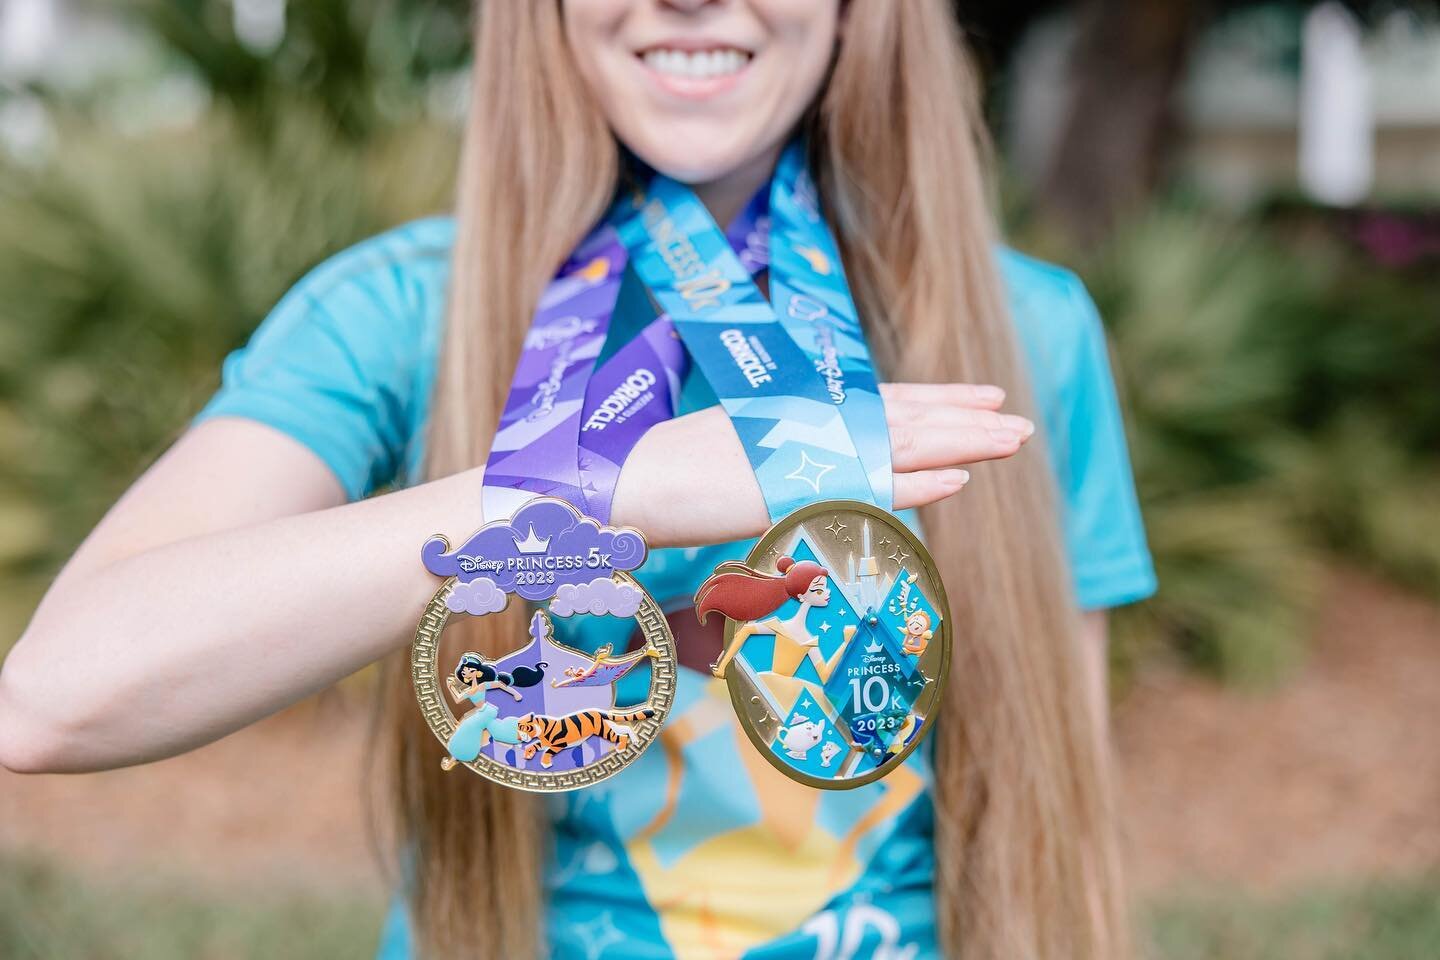 Happy Medal Monday to all the @rundisney Princess racers!
&bull;

#photography #photographer #orlandophotographer #orlandophotography #disneyphotography #disneyphotographer
#celebrationphotographer #winterparkphotographer #windermerephotographer #cen